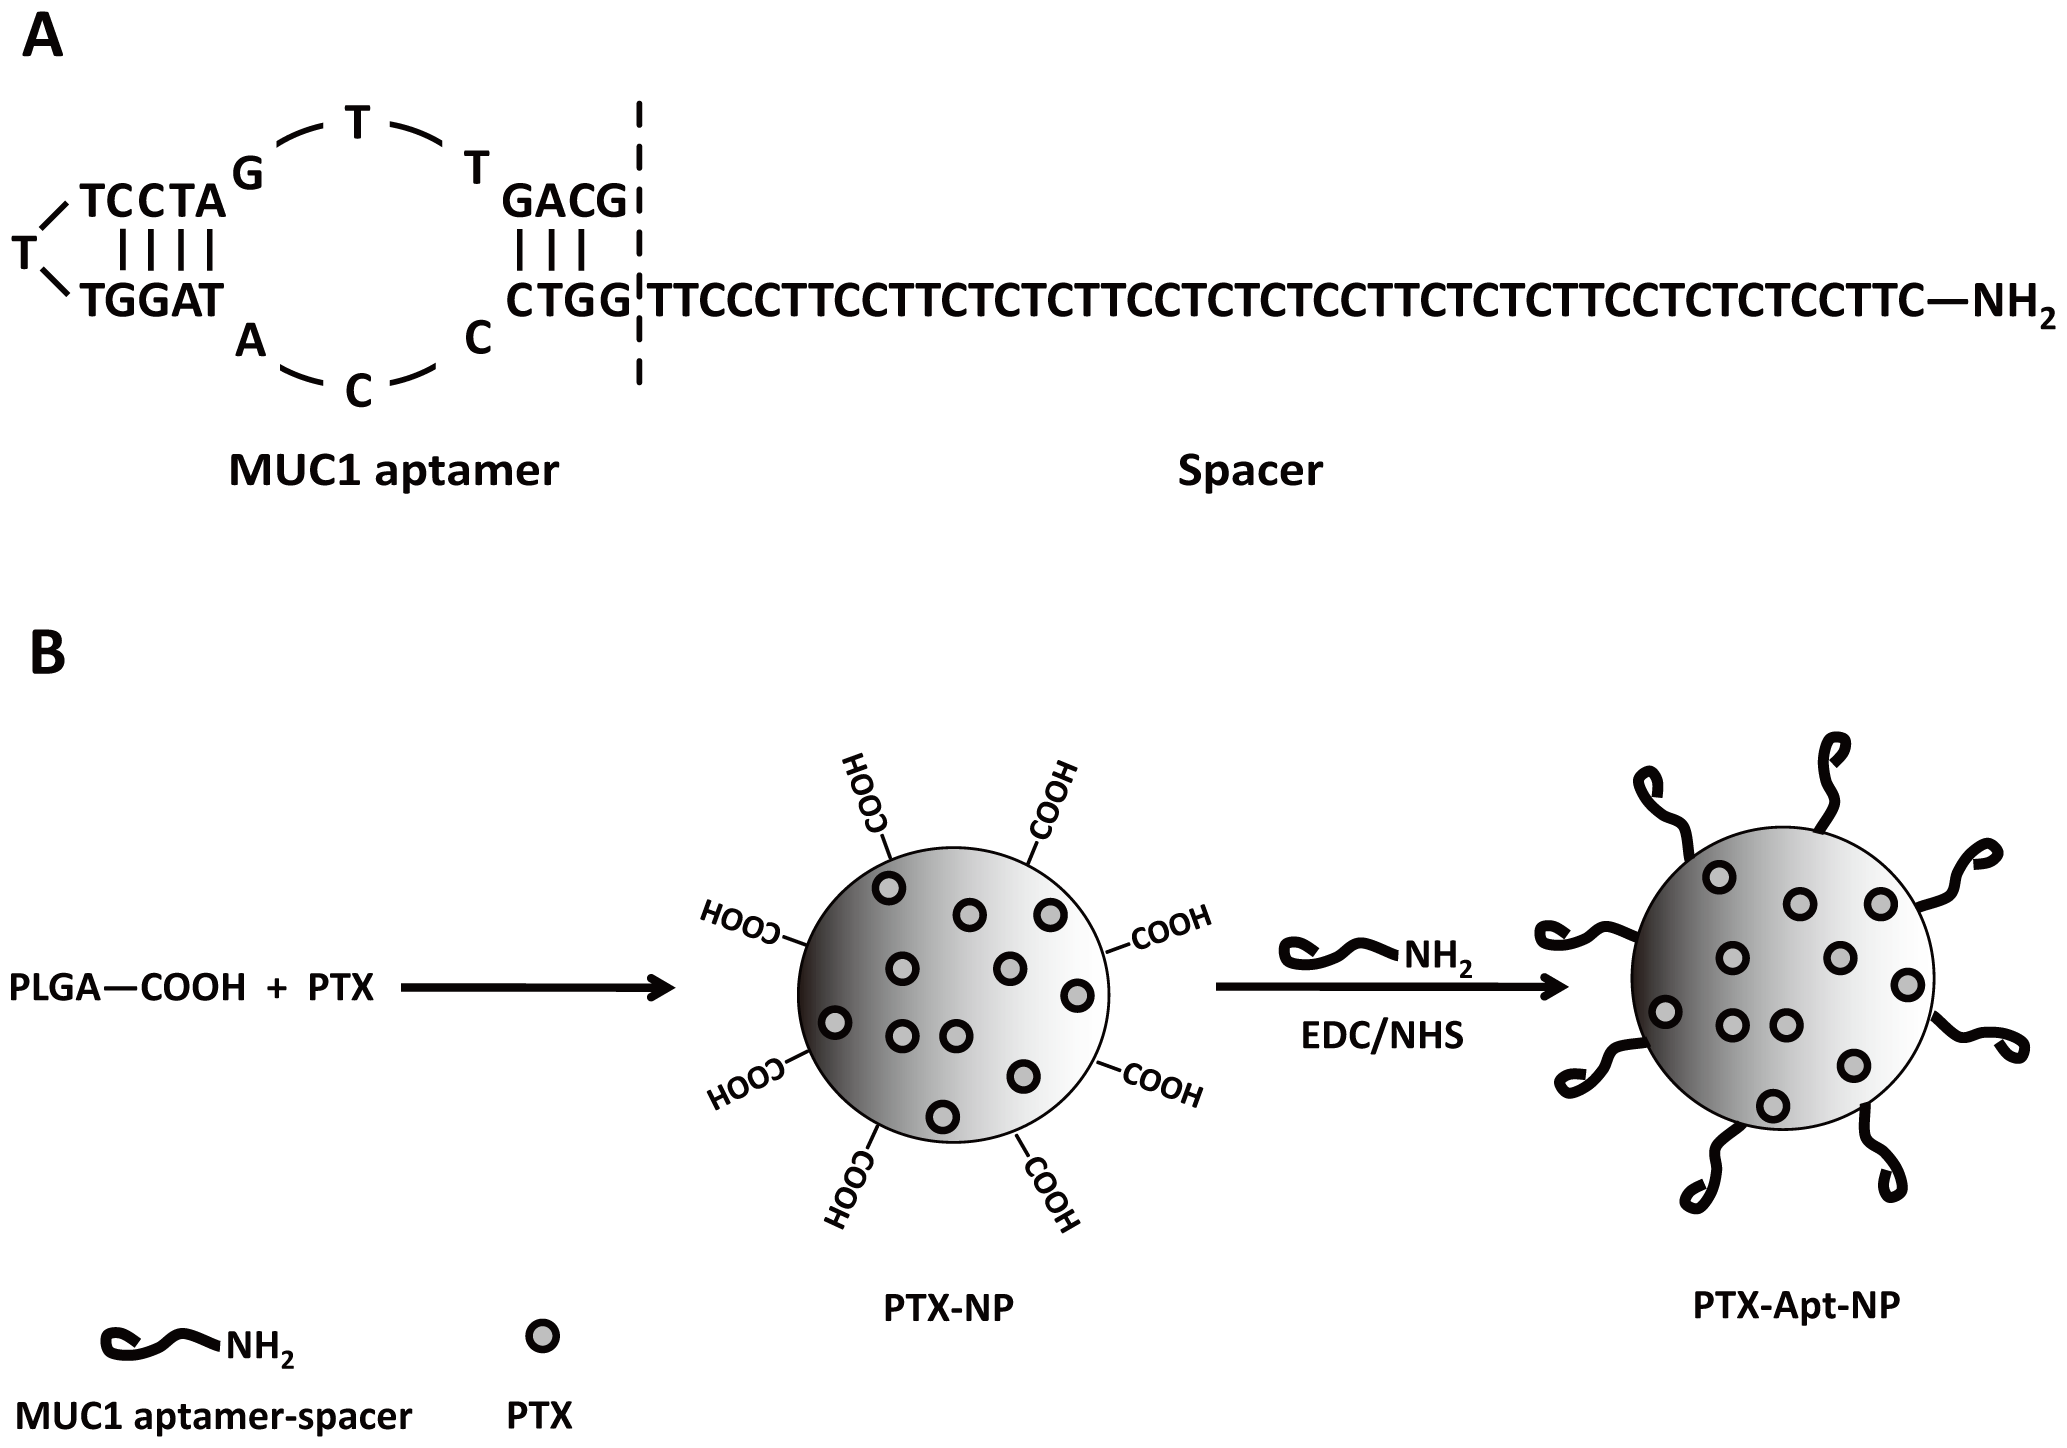 Construction of the S2.2-spacer aptamer and PTX-Apt-NPs.